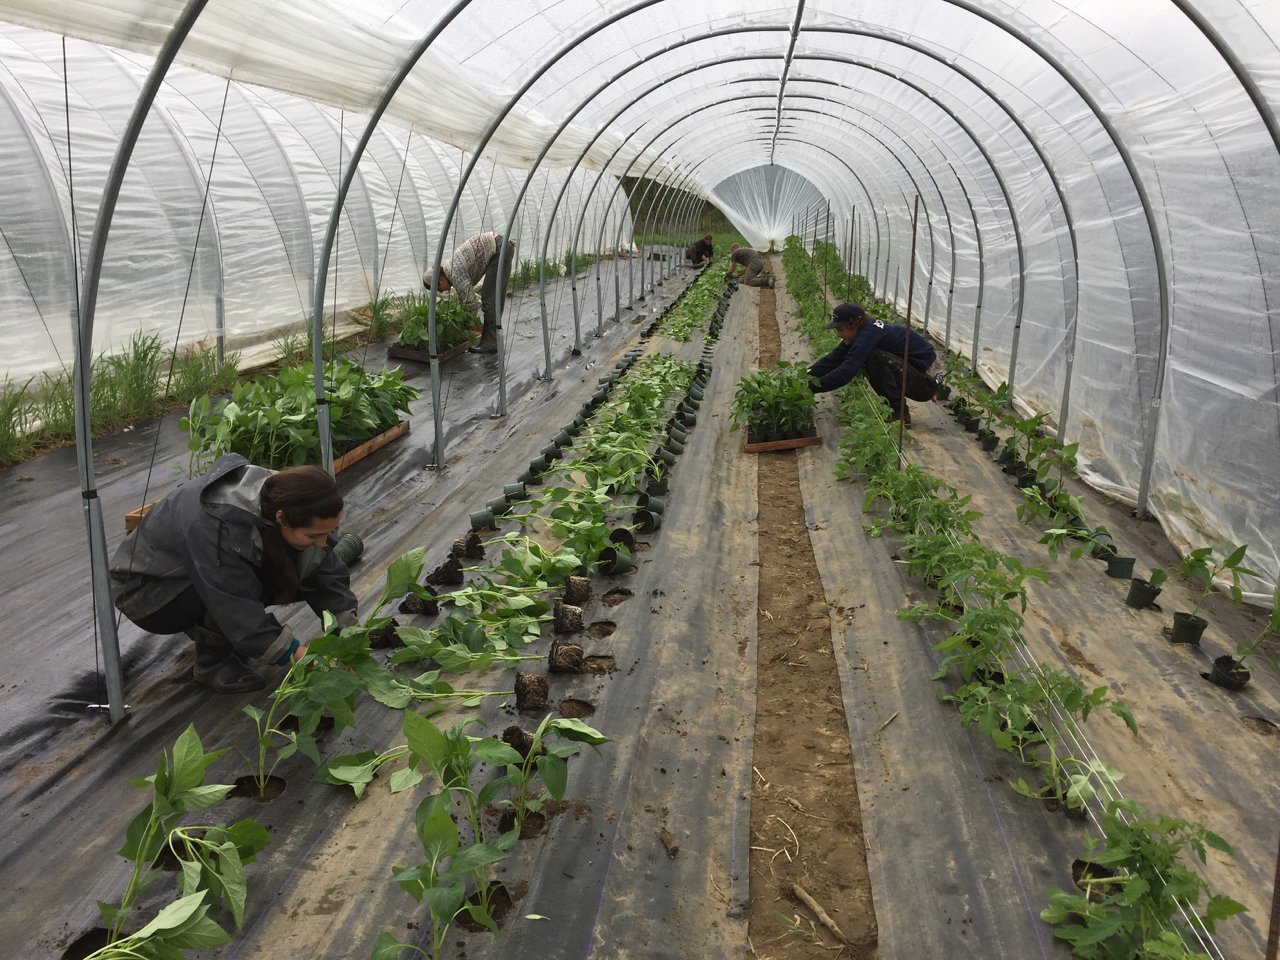 Farm Happenings for May 14, 2019